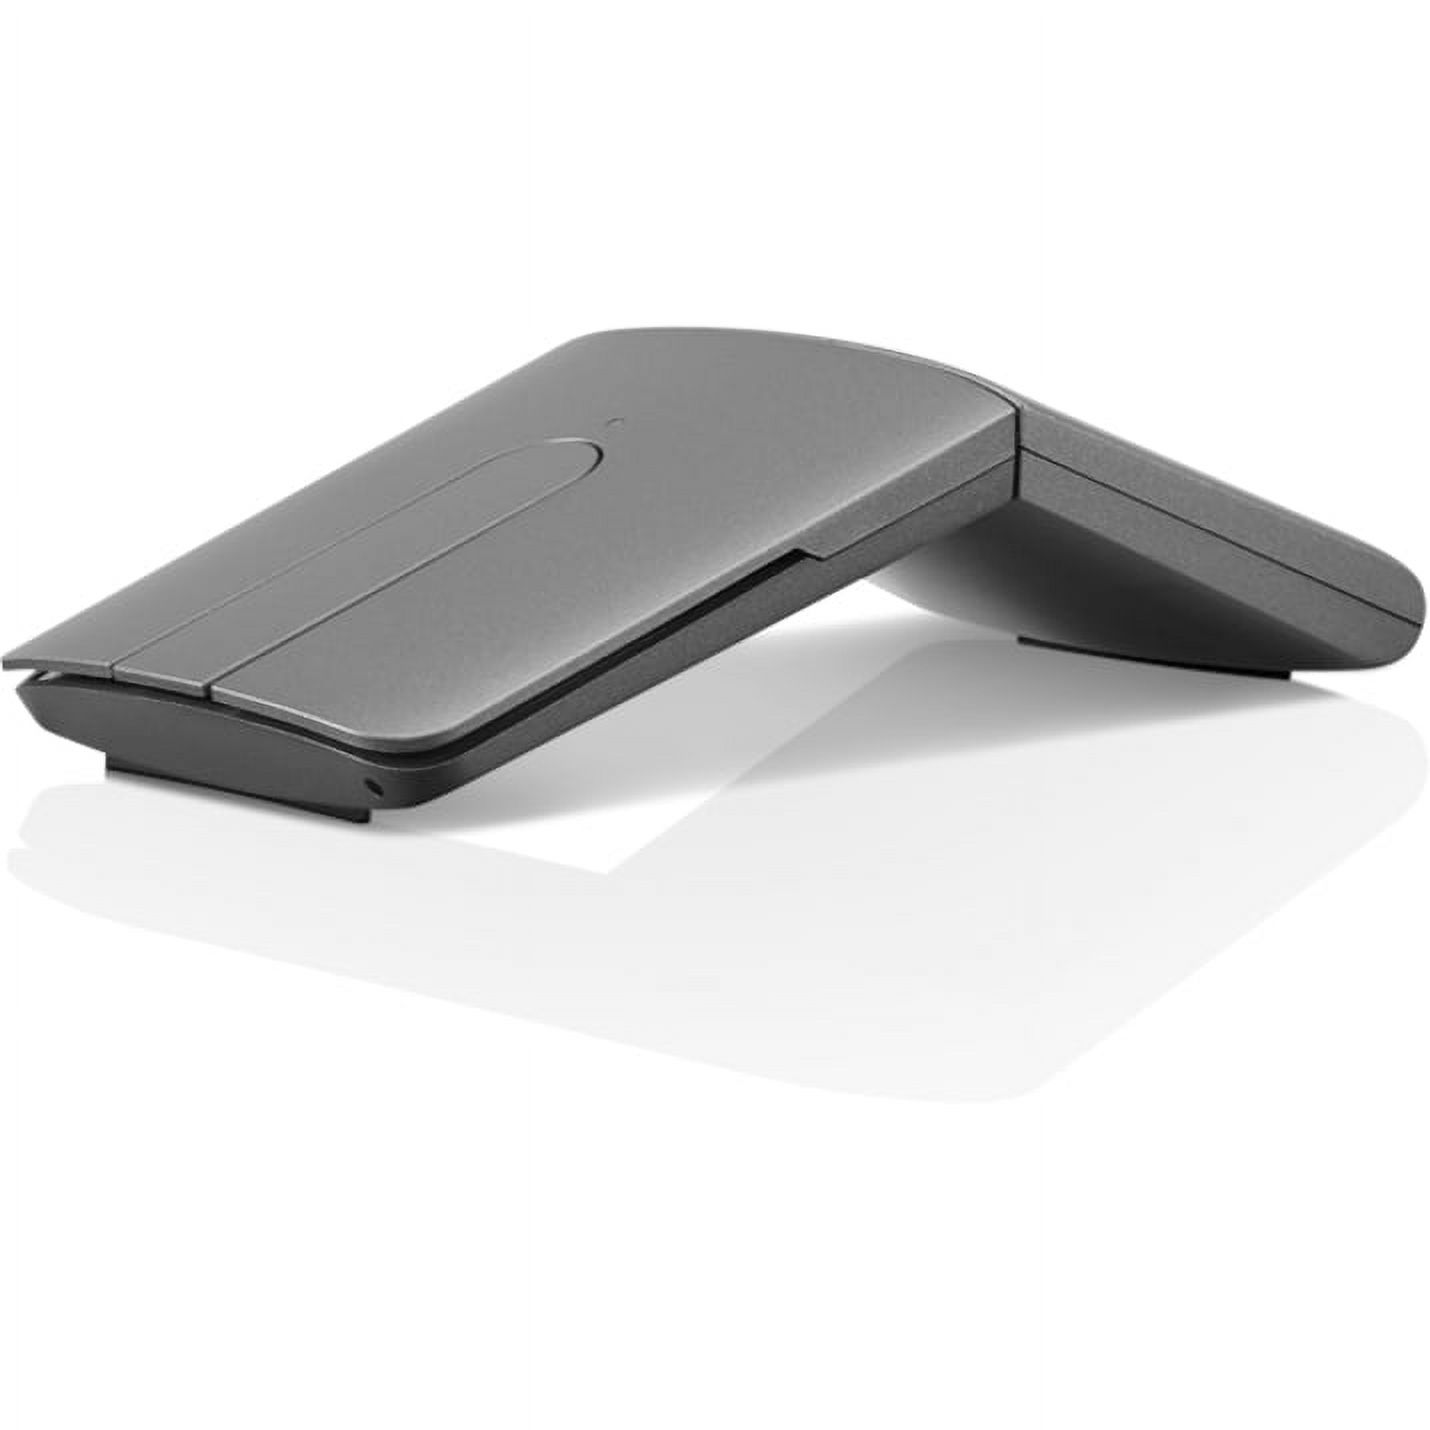 Lenovo YOGA Mouse with Laser Presenter - image 1 of 2